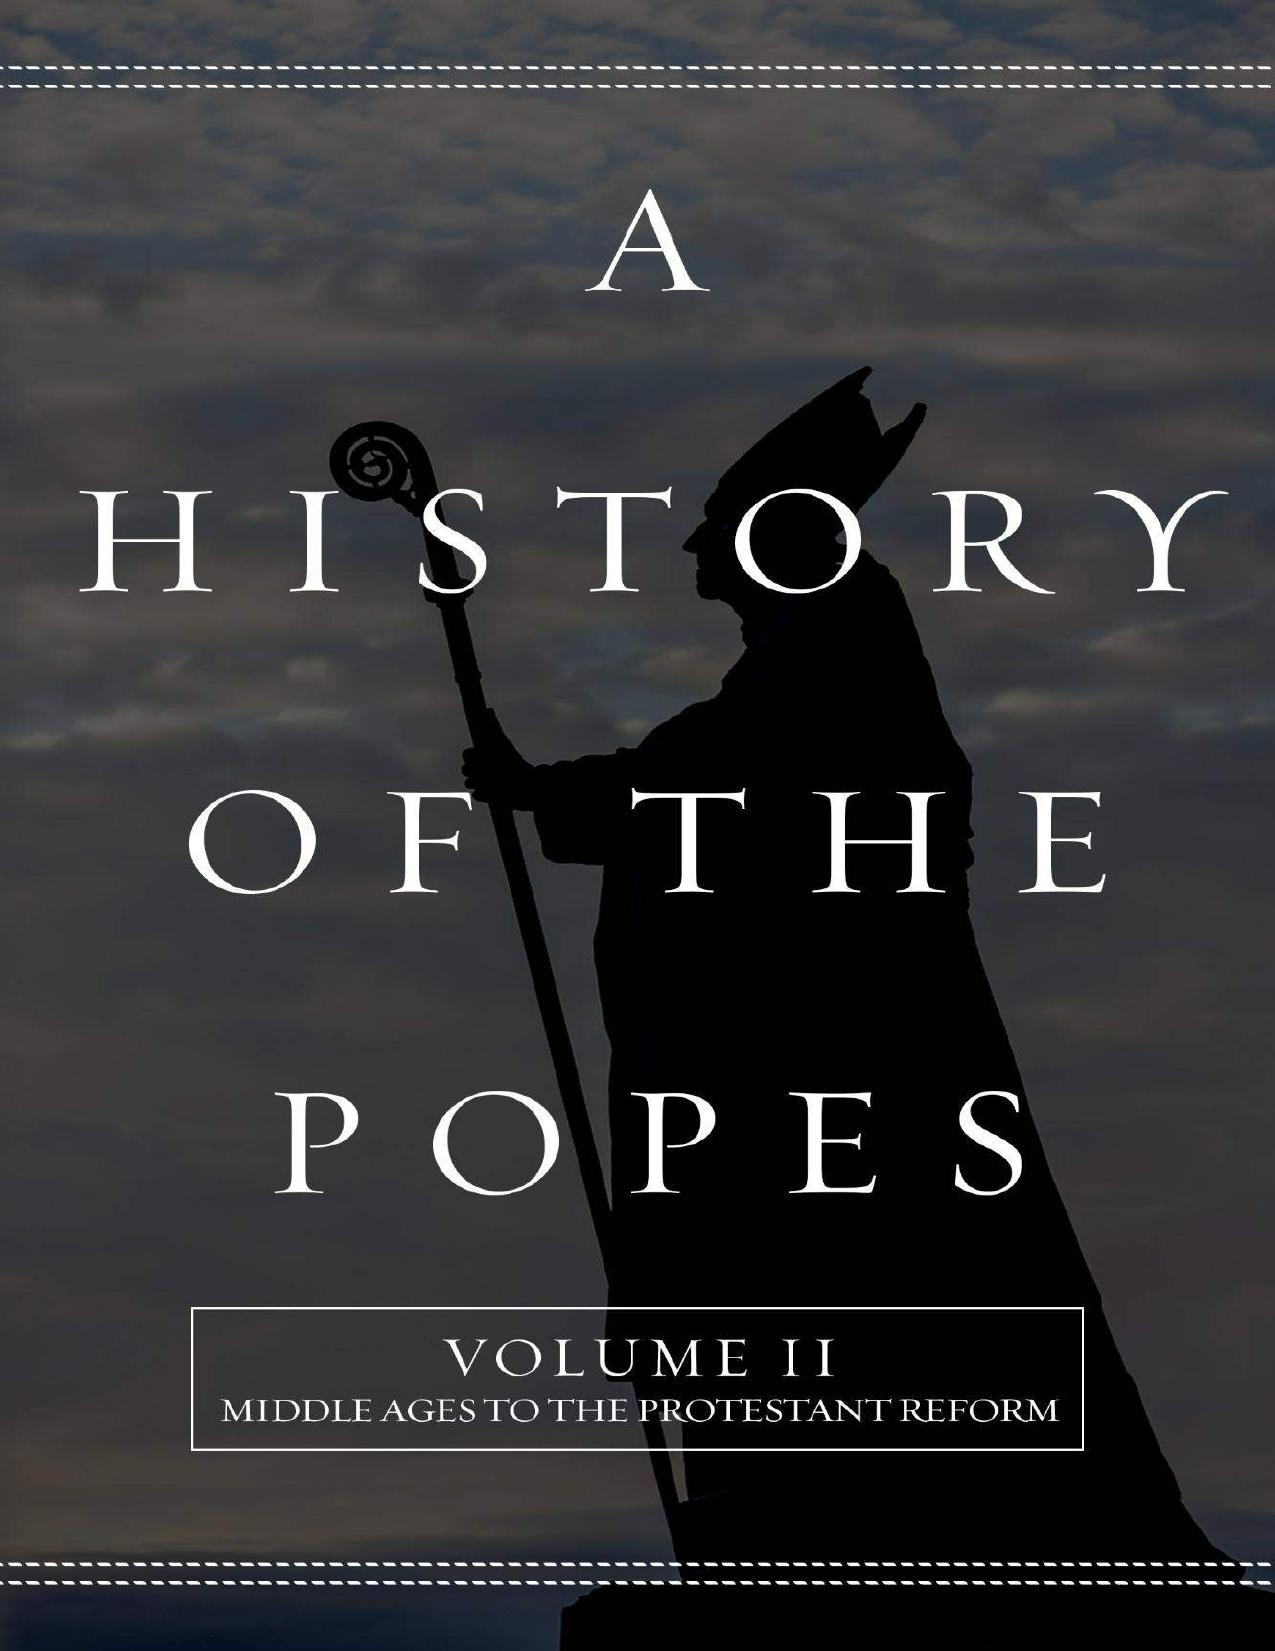 A History of the Popes: Volume II: Middle Ages to the Protestant Reform by Wyatt North